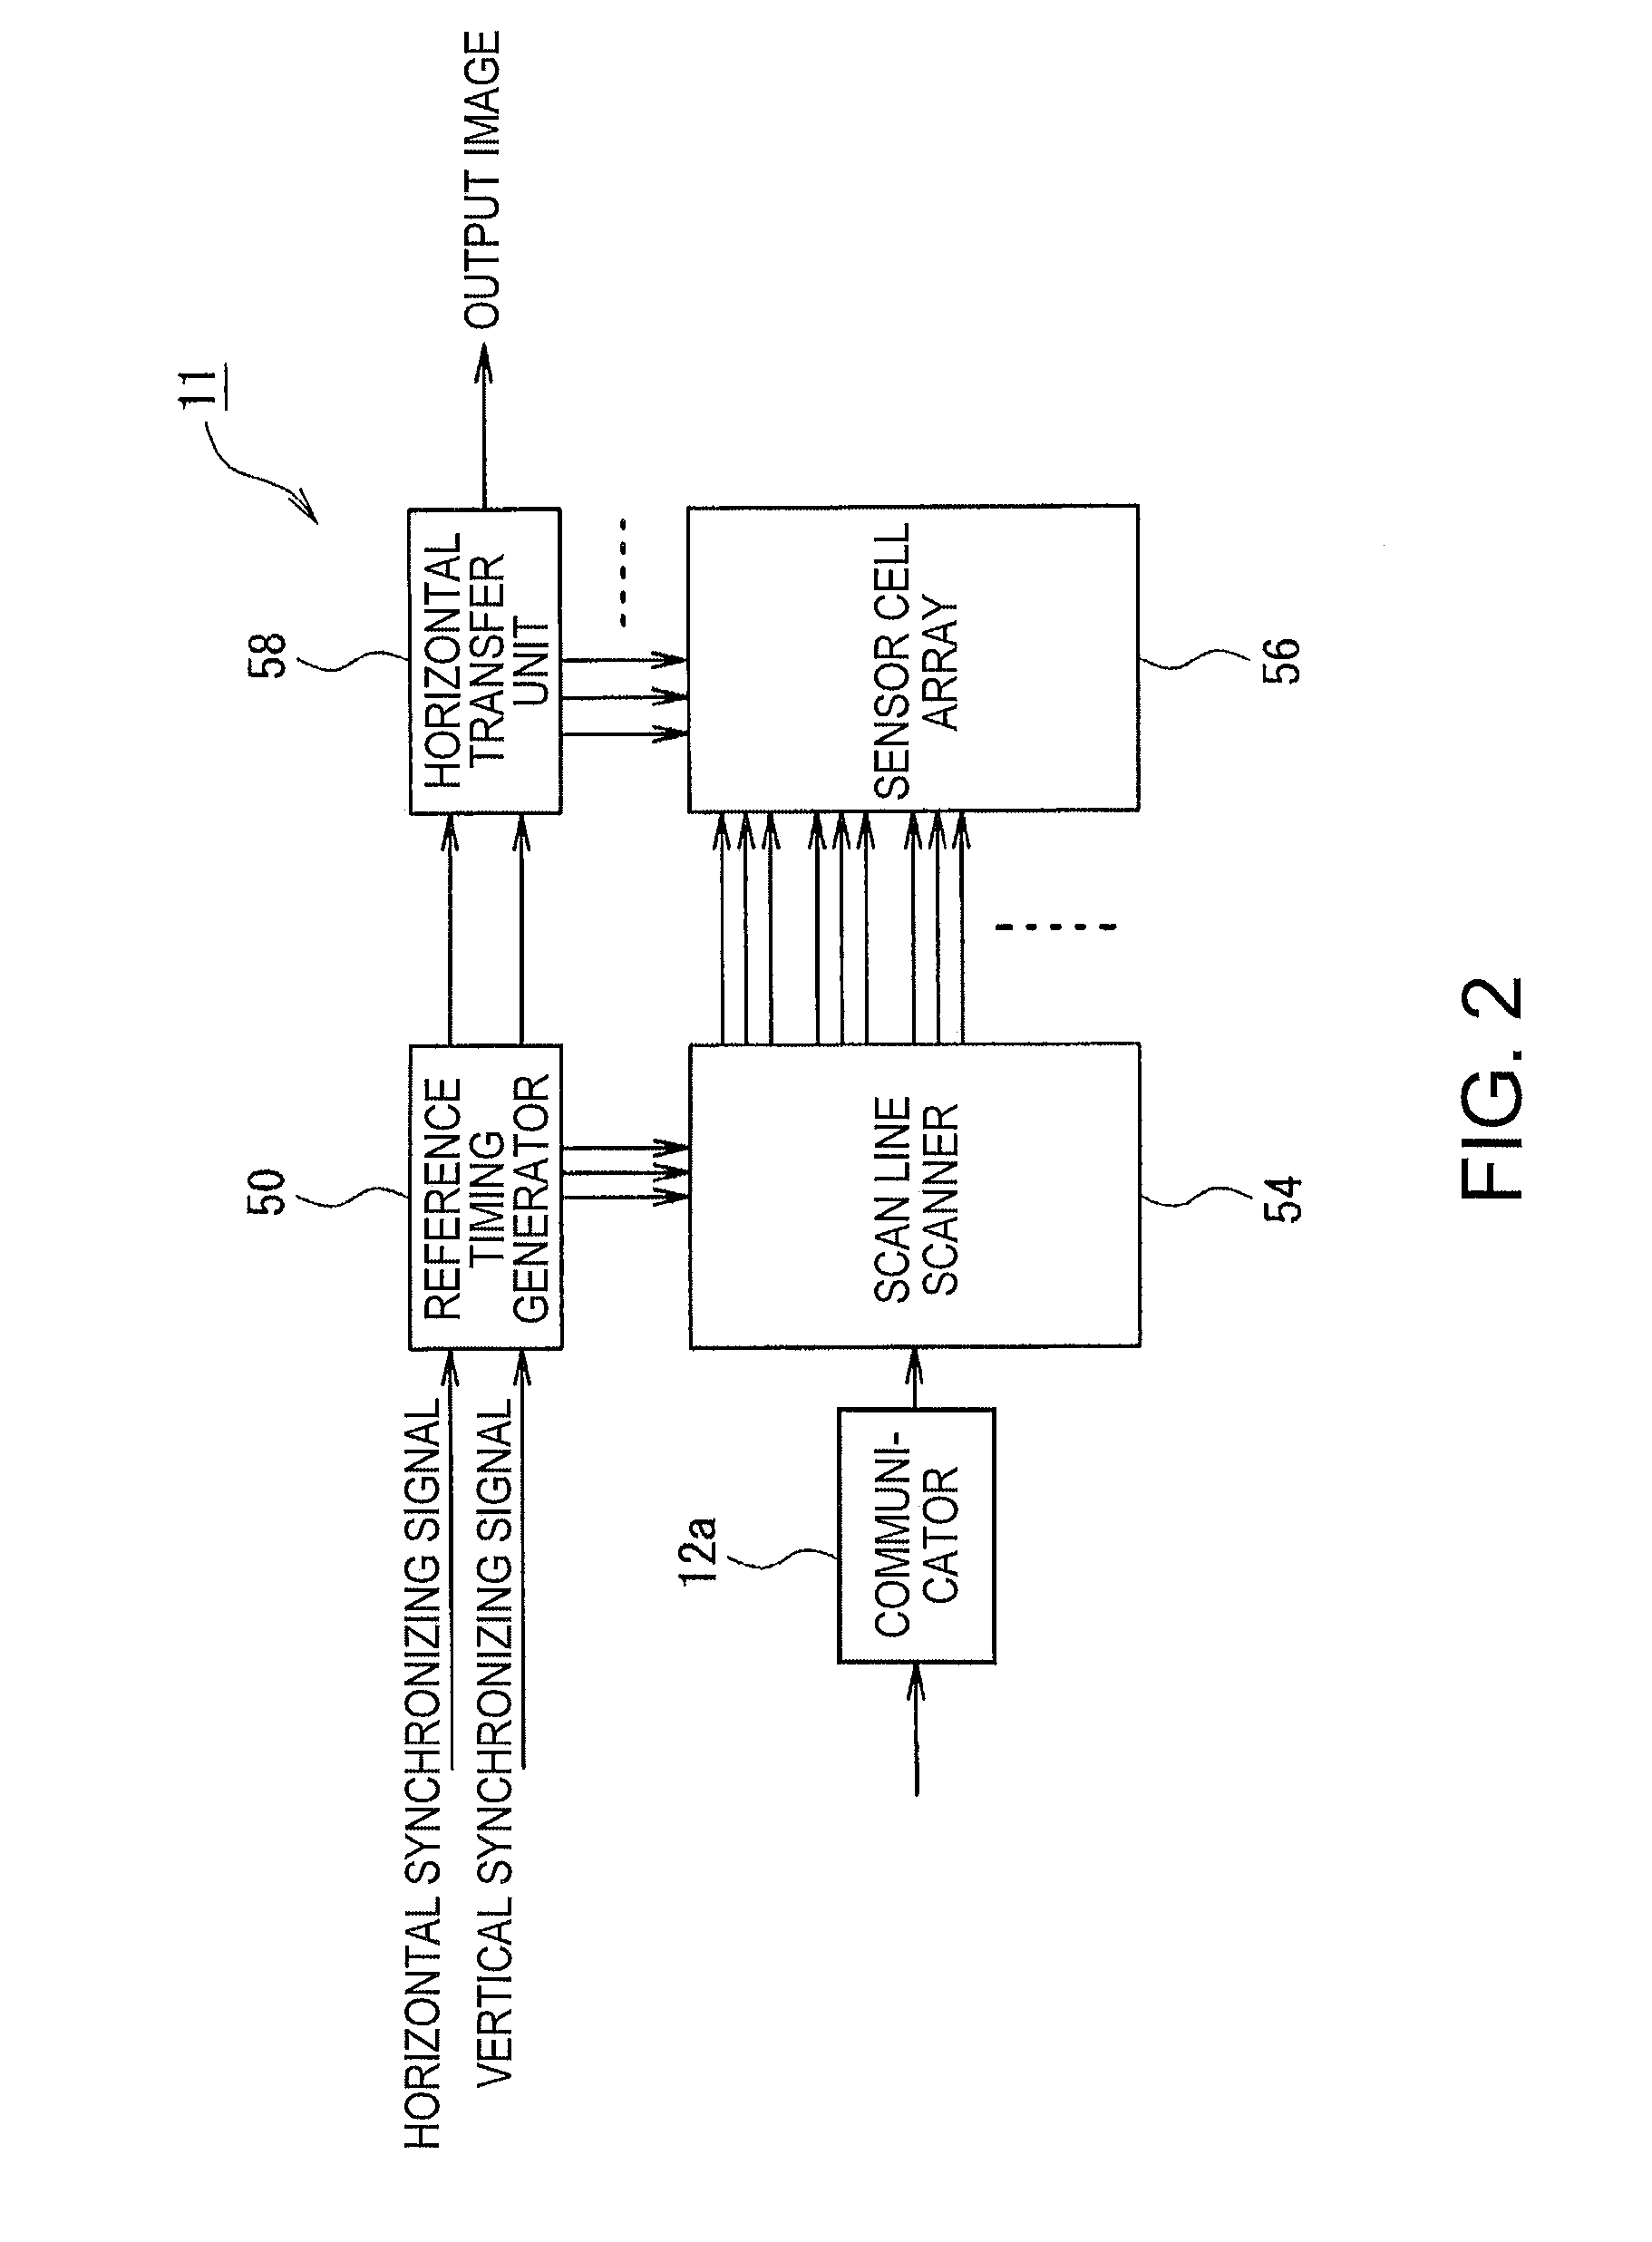 Image taking apparatus and image recorder